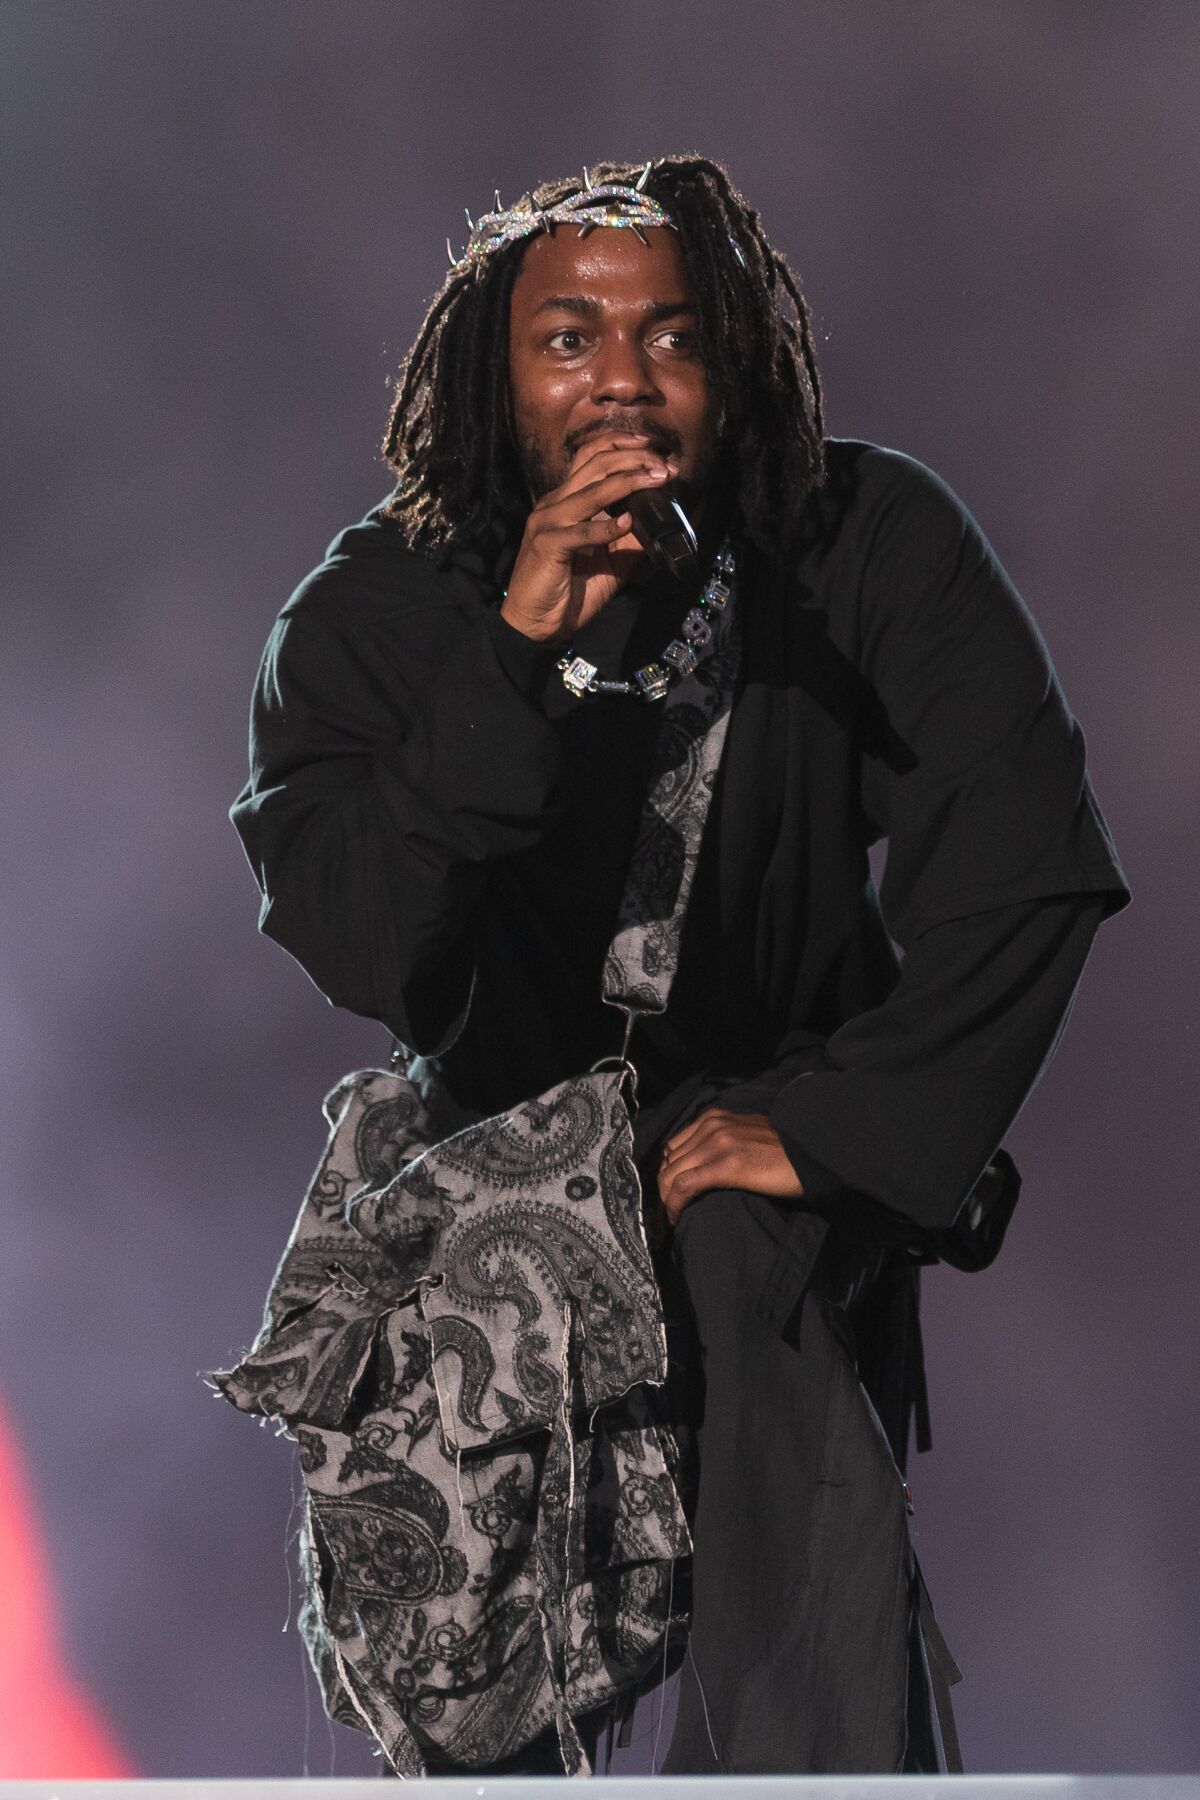 Rapper Kendrick Lamar performs onstage during day three of Rolling Loud Miami 2022. (Photo by Jason Koerner/Getty Images)